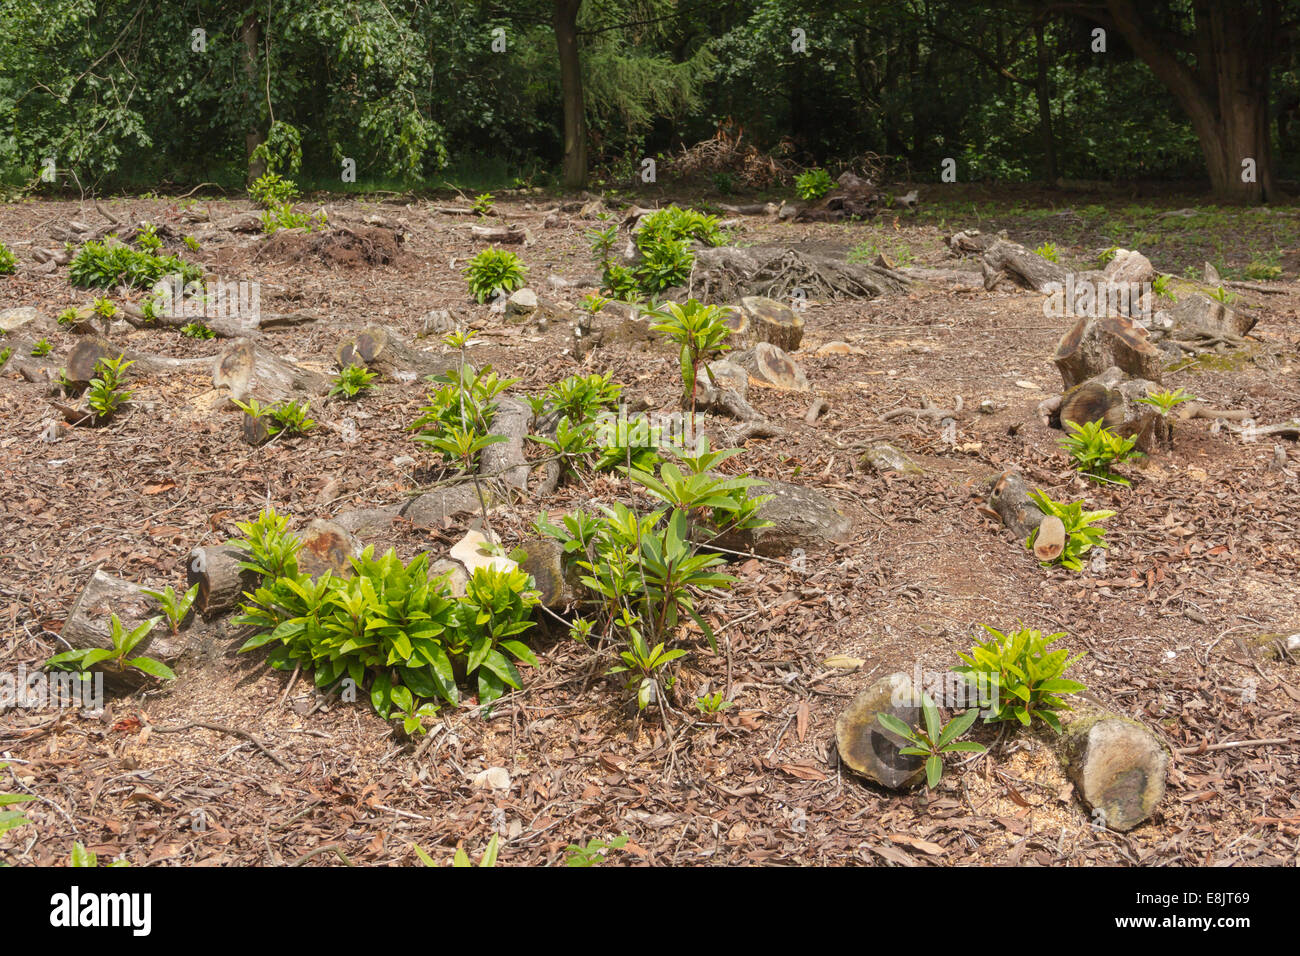 Stumps of Rhododendron bushes remain in the ground after a clearance programme, with some sprouting of new growth. Stock Photo